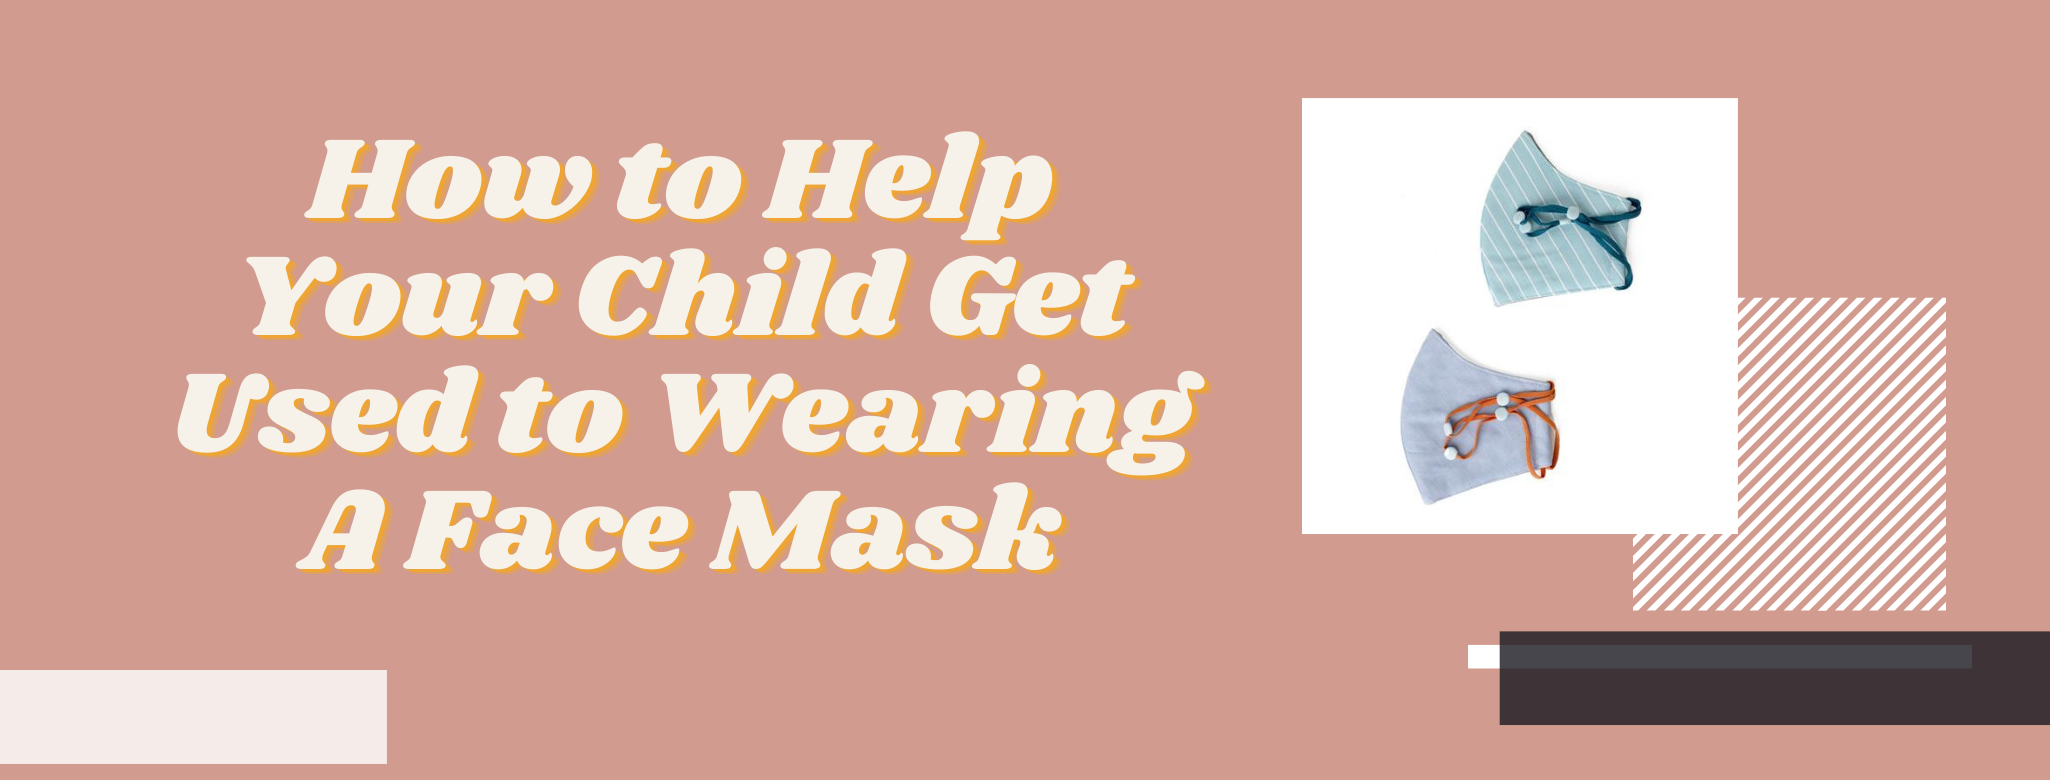 How to Help Your Child Get Used to Wearing A Face Mask